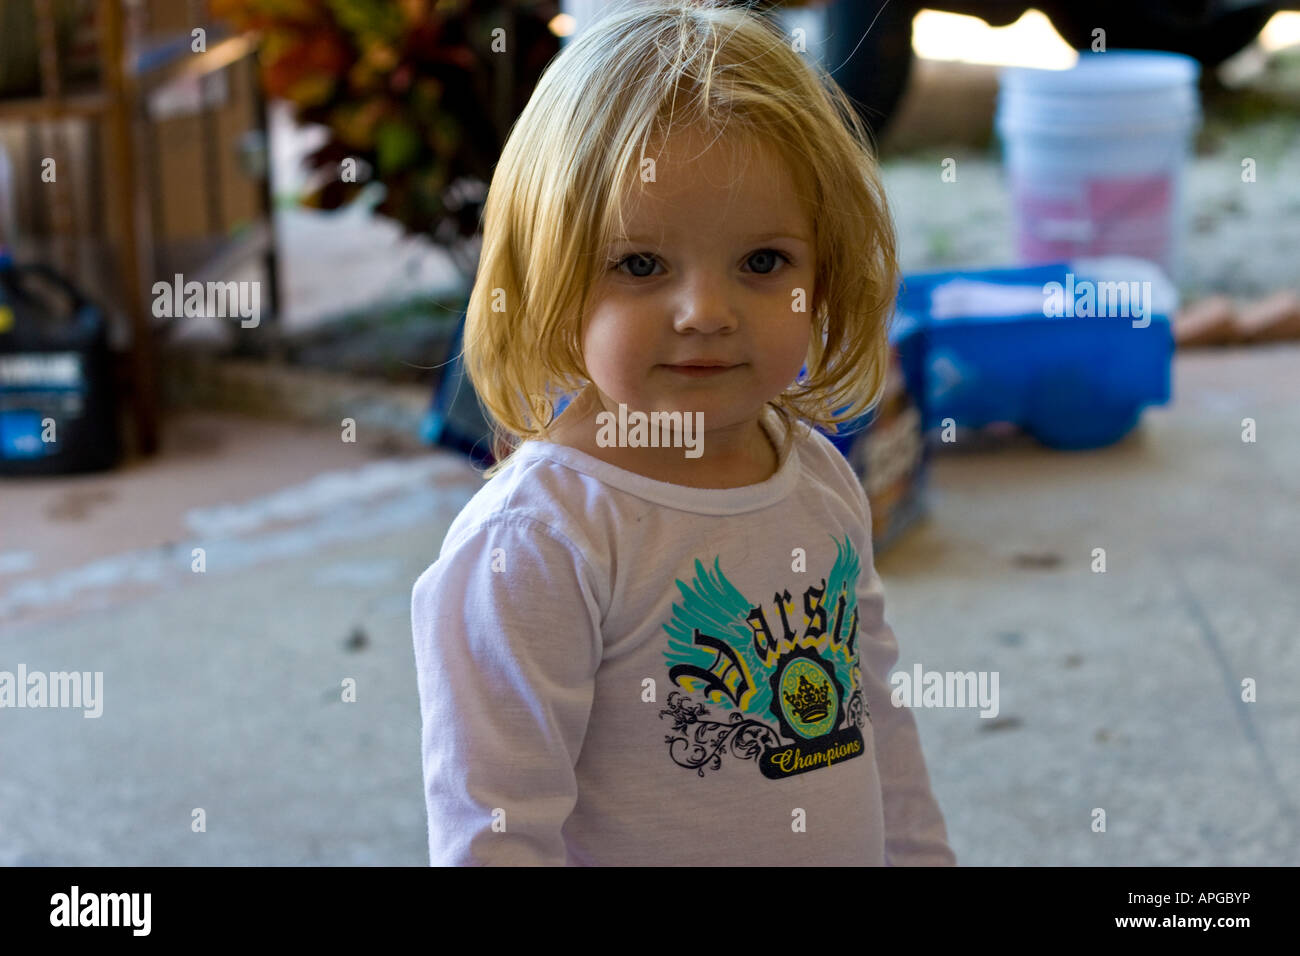 Adorable Girl Blue-Eyed Blonde Haired Toddler in a Messy Room Stock Photo